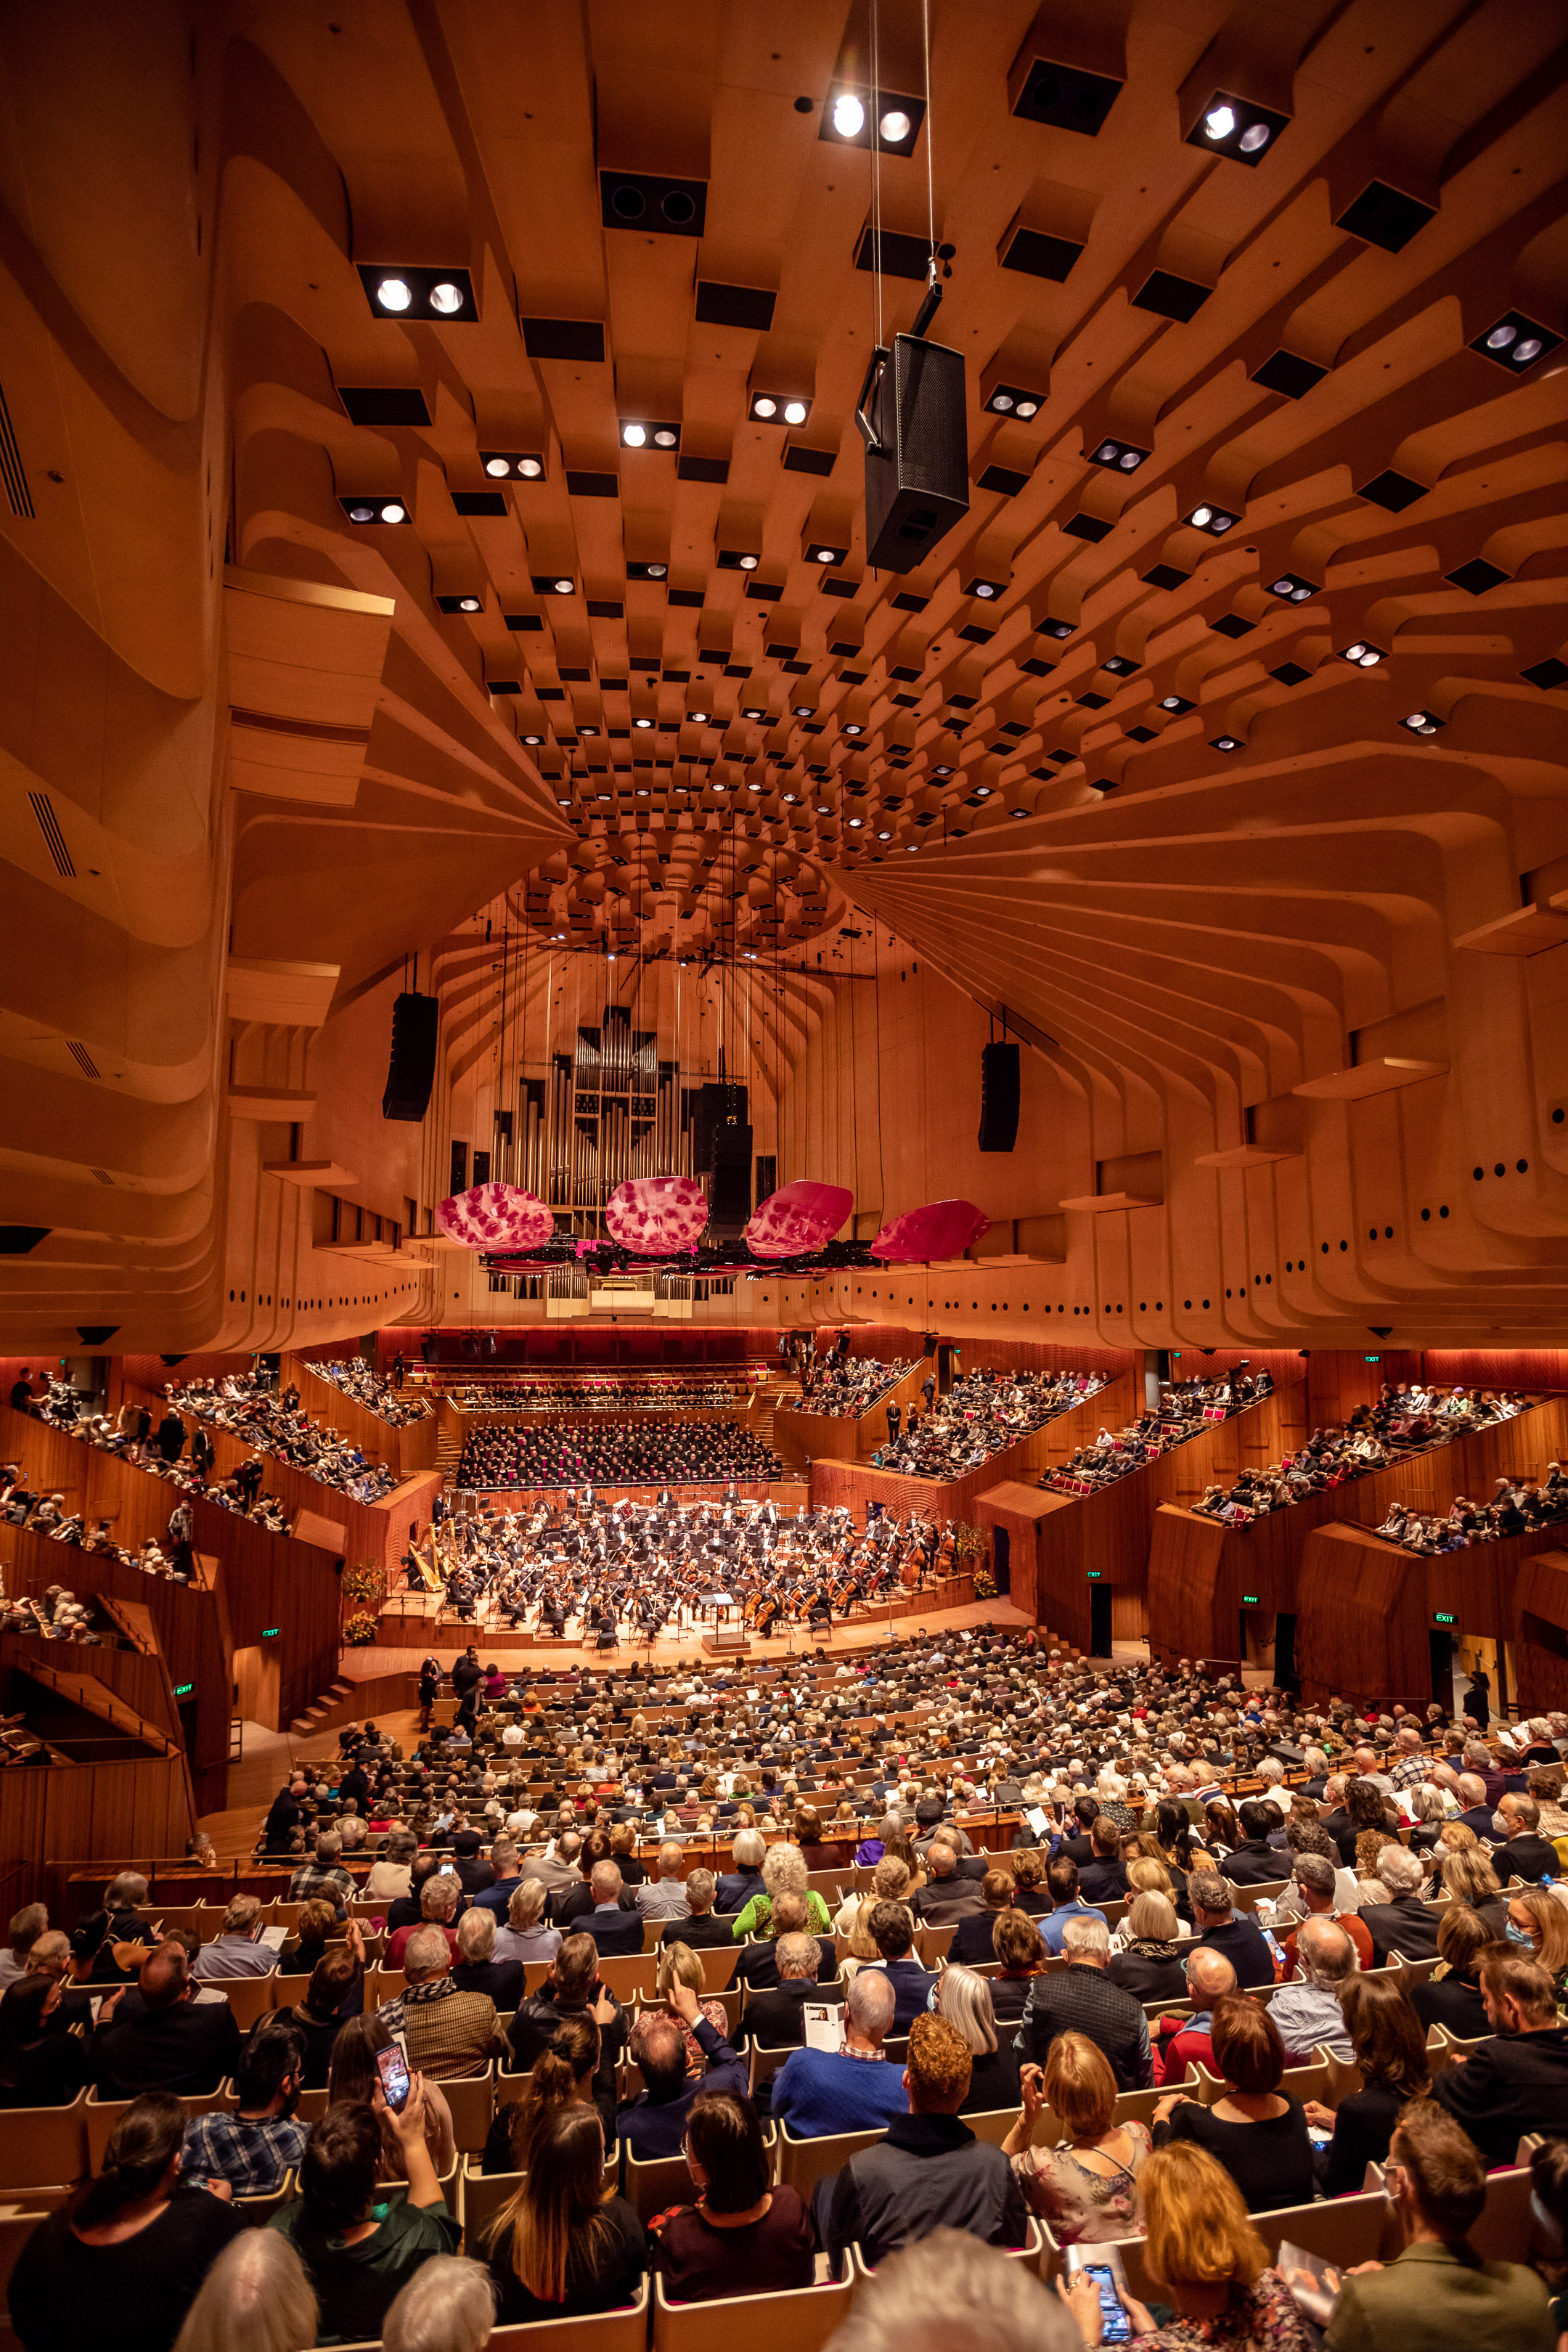 Sydney Symphony Orchestra performing in the newly renovated Concert Hall.